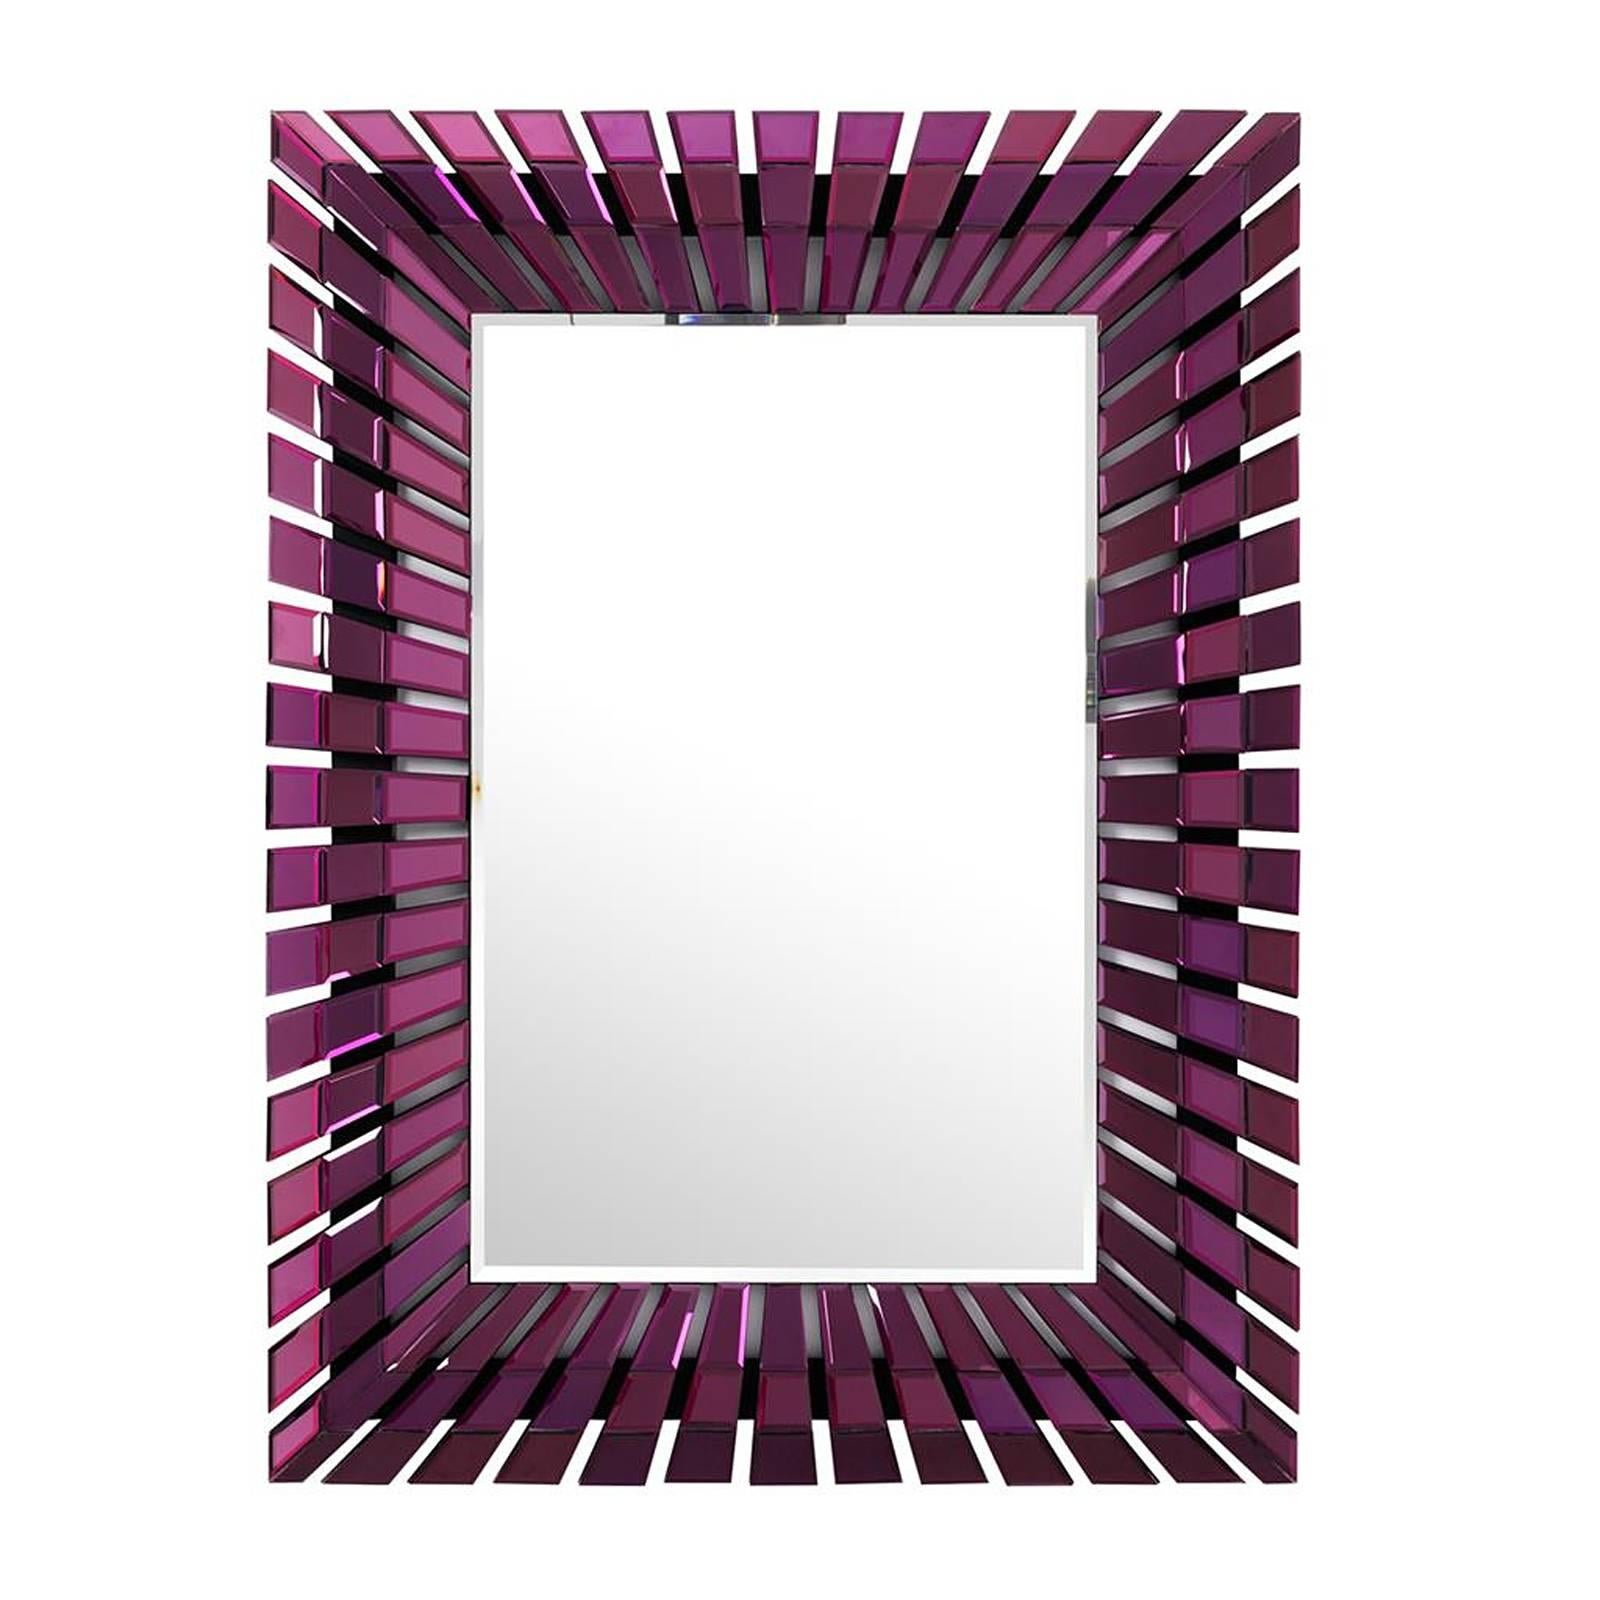 Chinese Eclipse Mirror with Purple Bevelled Mirror Glass